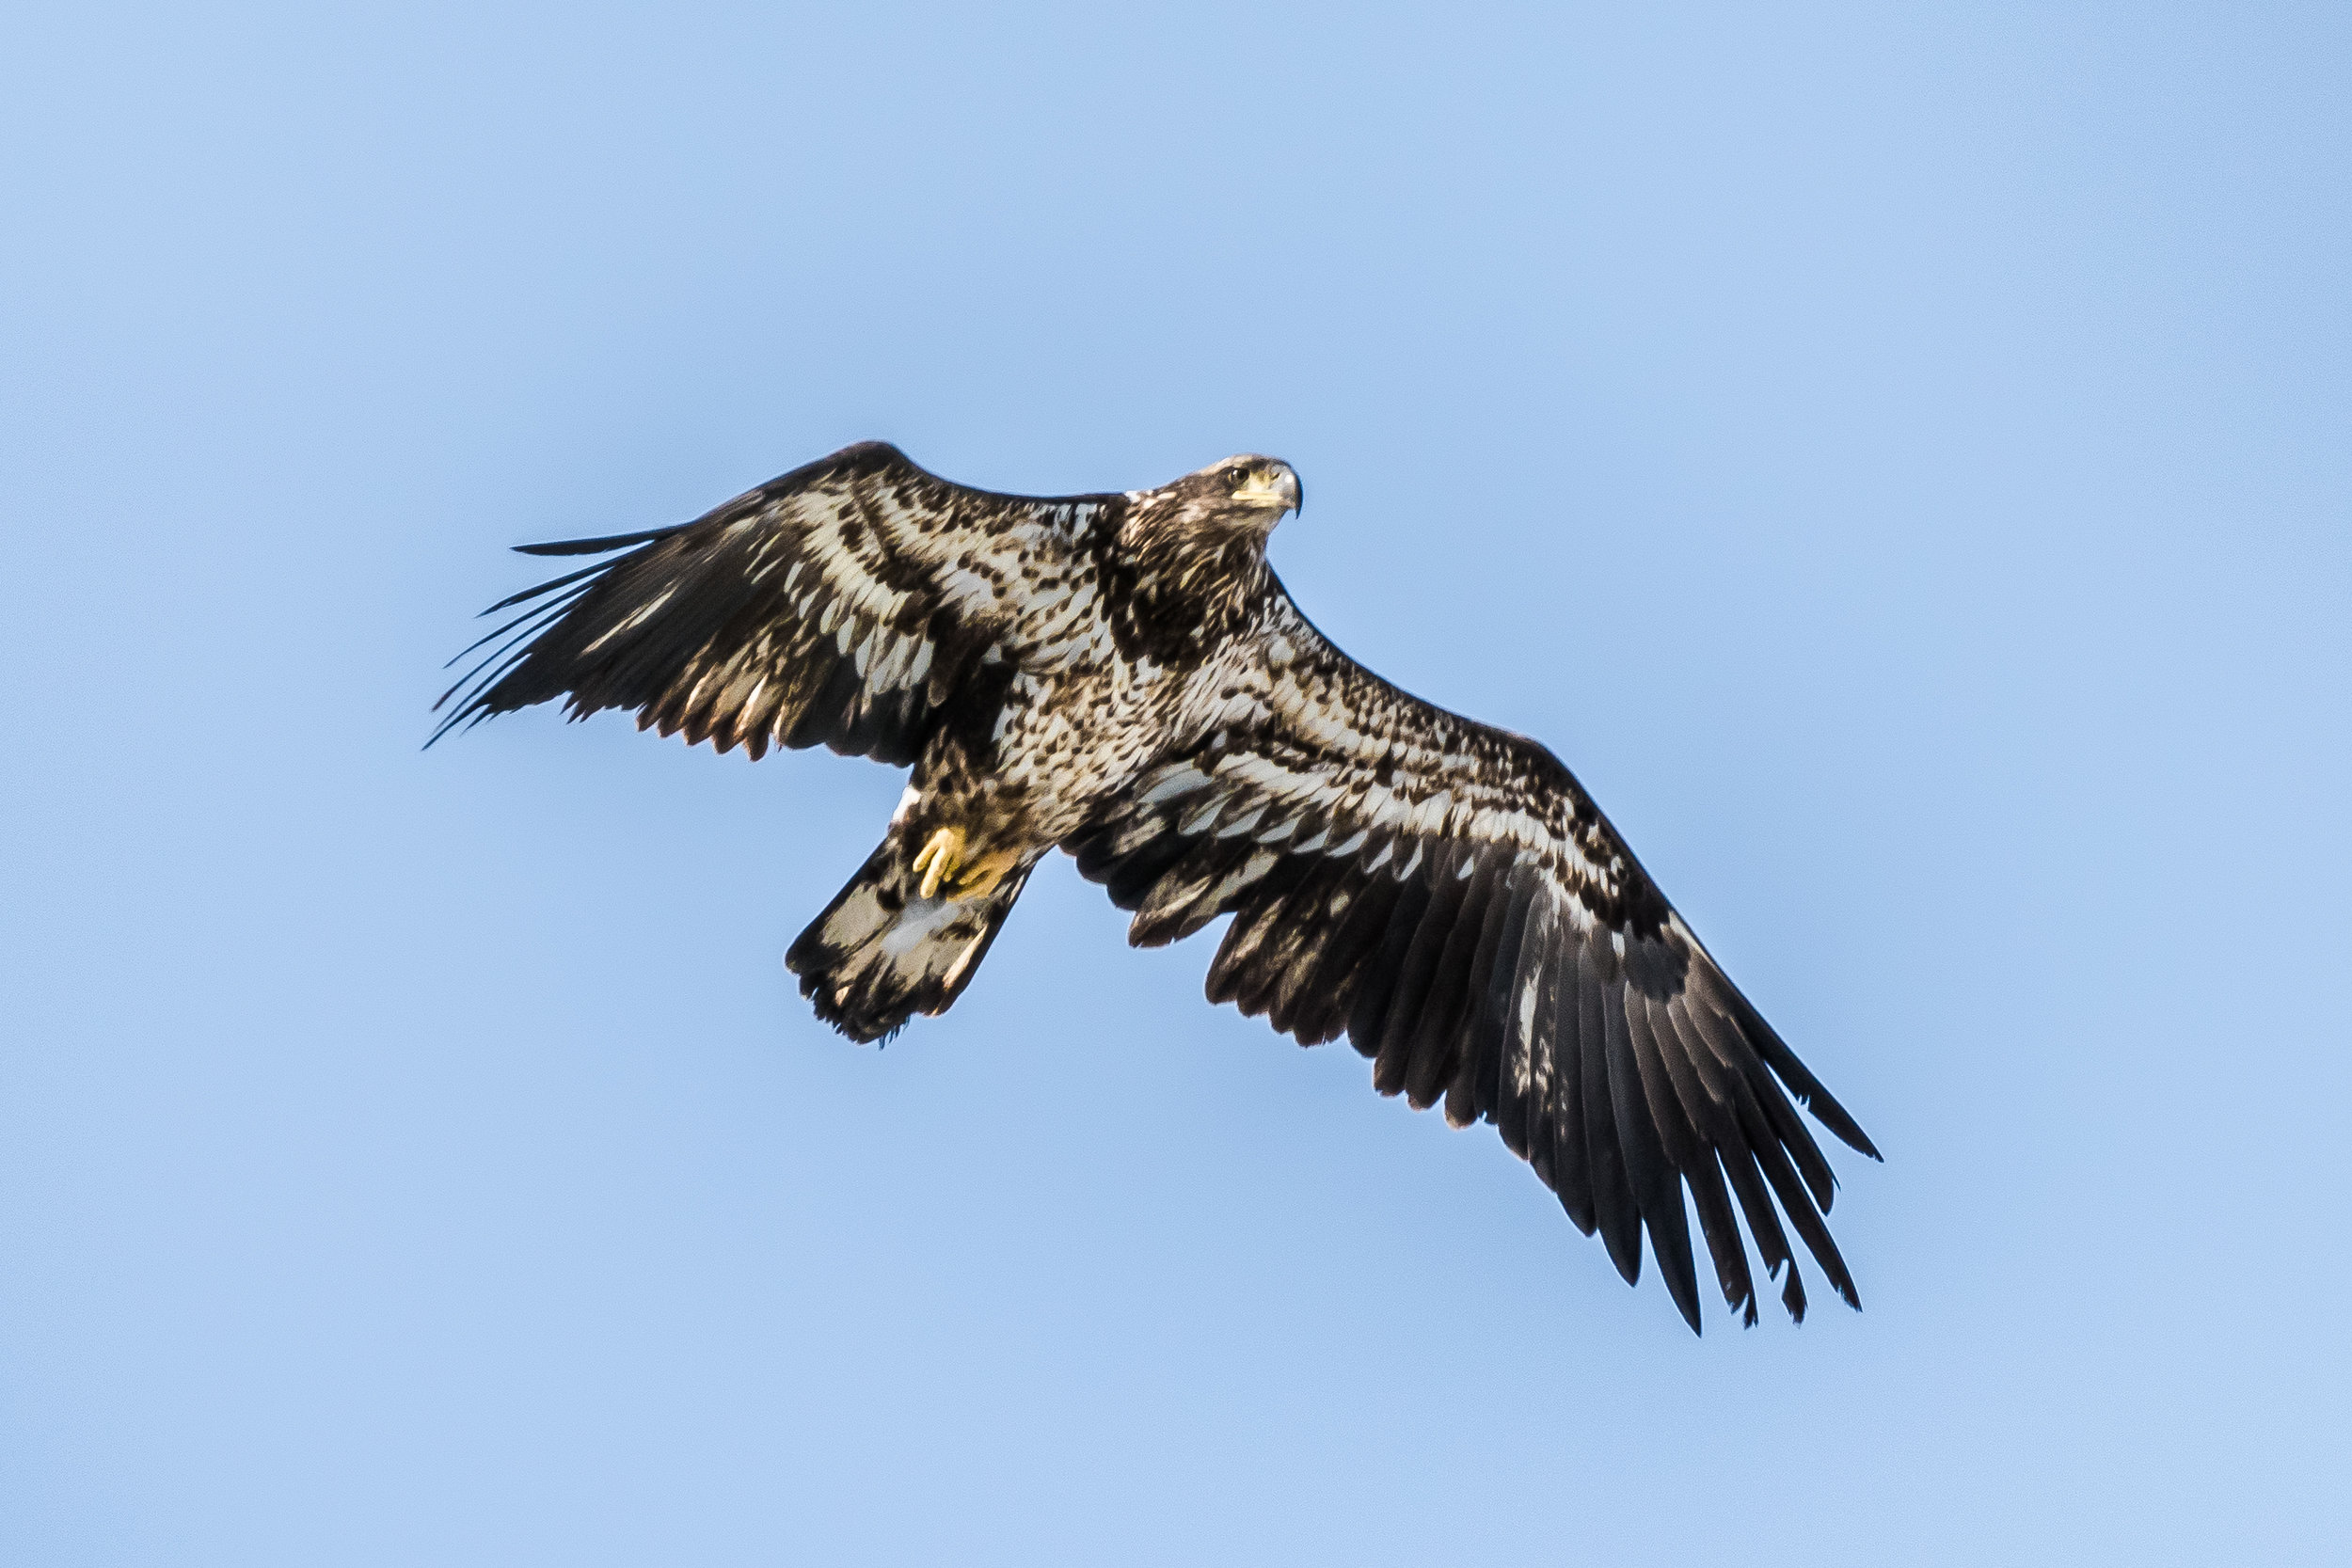   This juvenile bald eagle eagle went zipping right over me a few days ago. I just had enough time to get the camera up.  